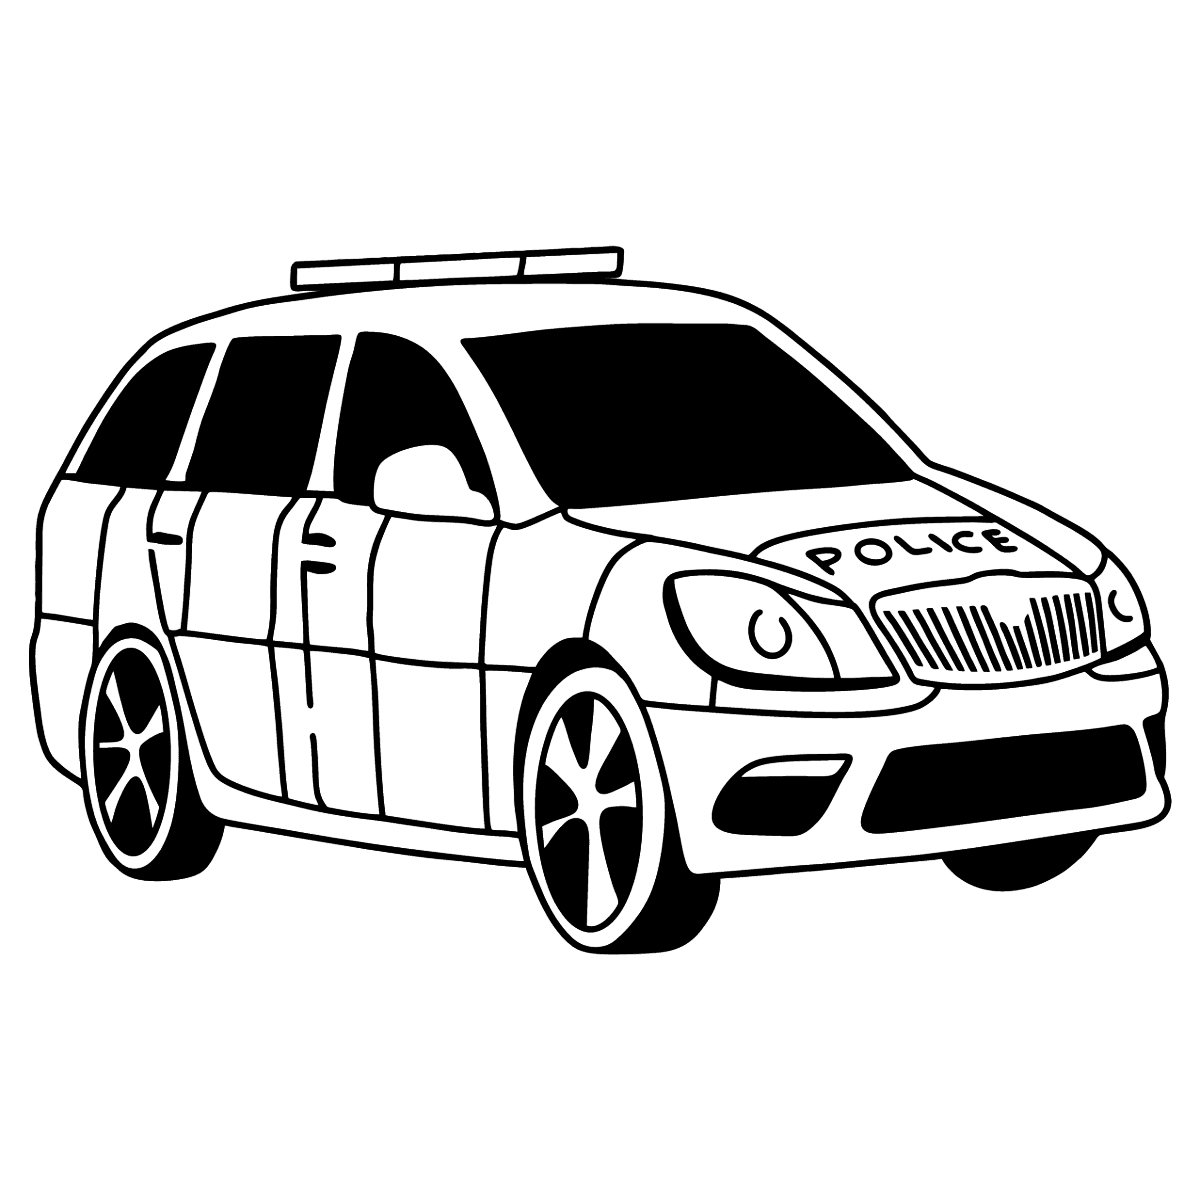 UK Police Car coloring page - Online or Printable for Free!